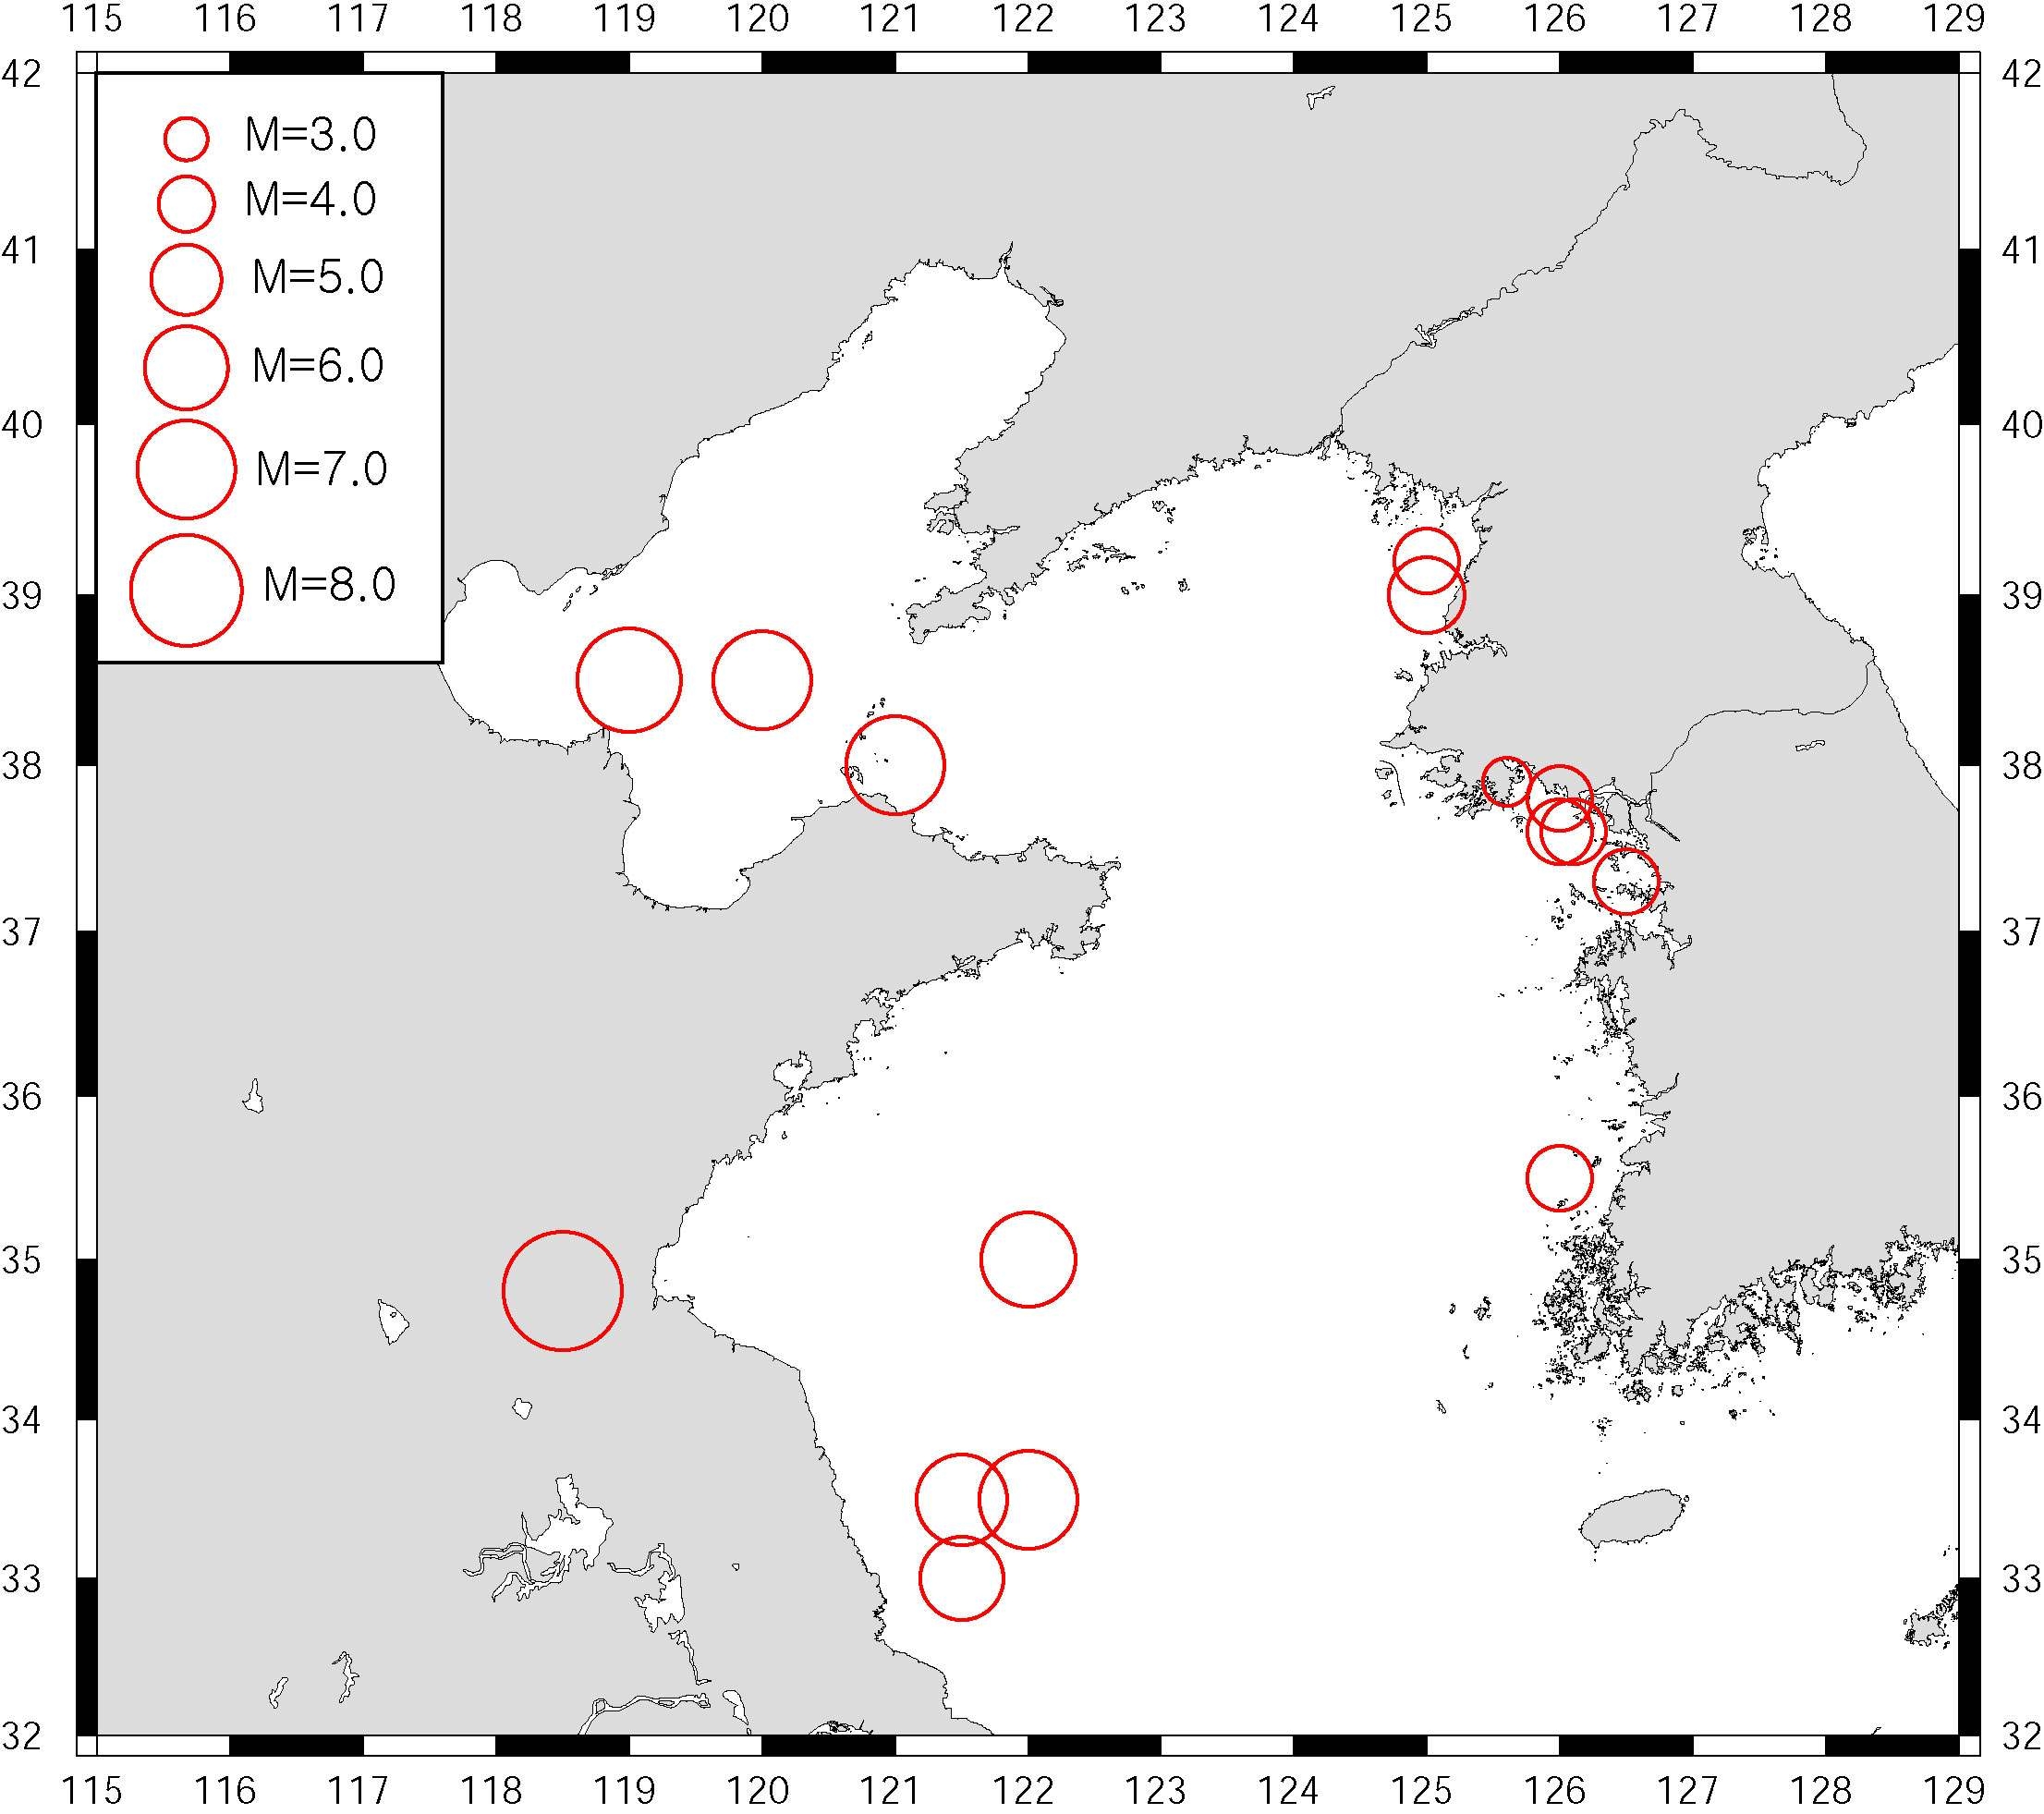 Locations of epicenters of the historical earthquakes that are inferred to have occurred in the Yellow Sea.